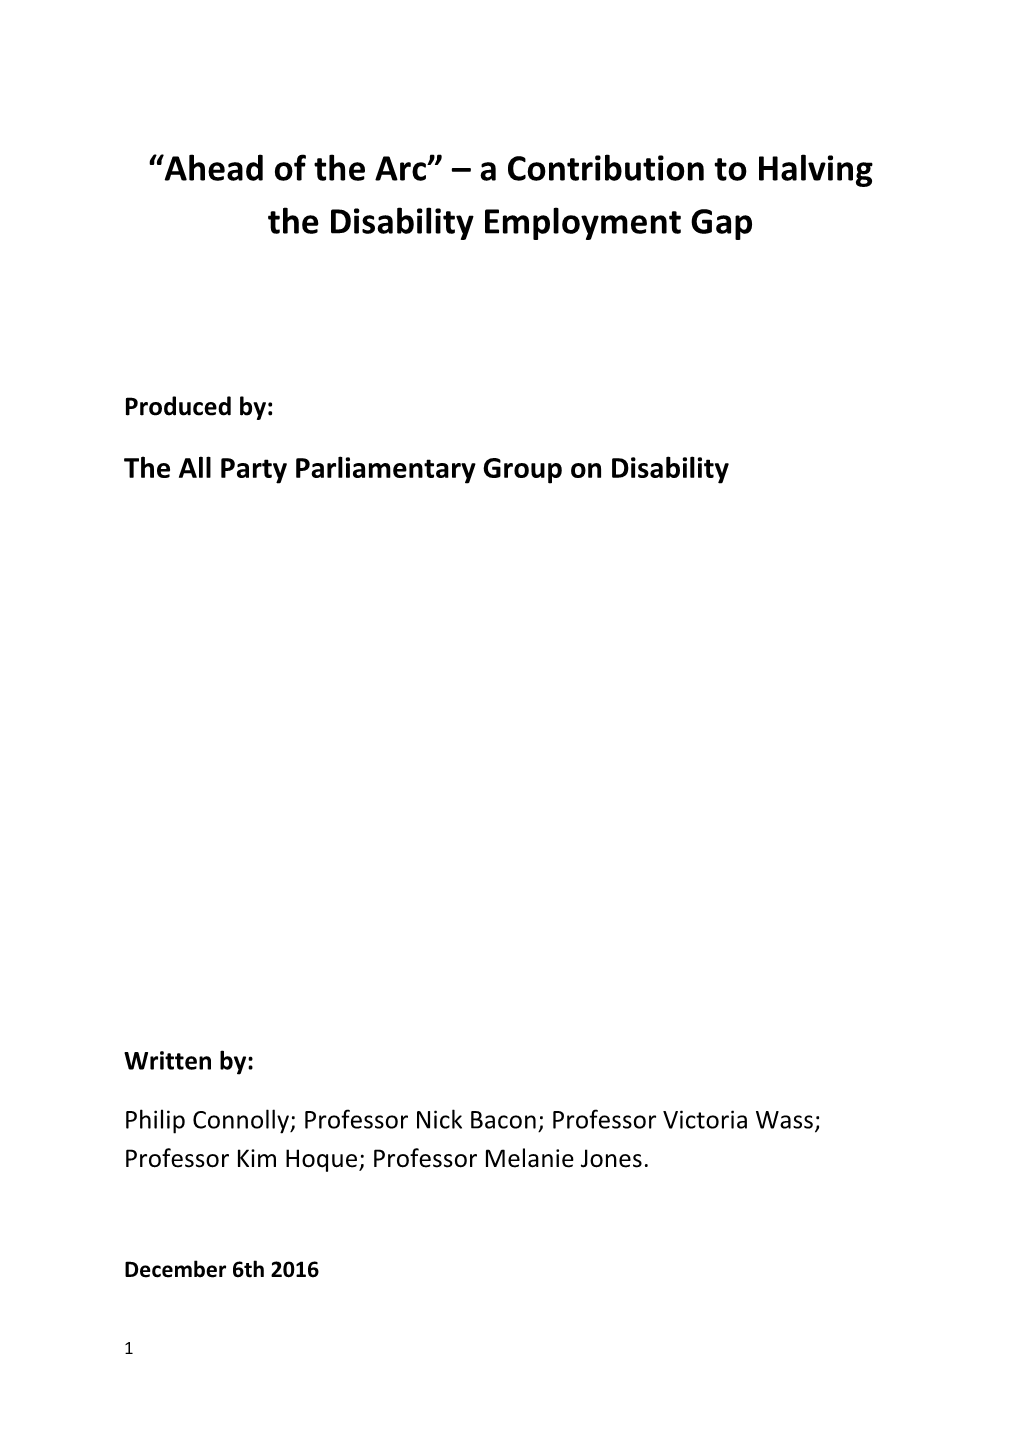 Ahead of the Arc” – a Contribution to Halving the Disability Employment Gap